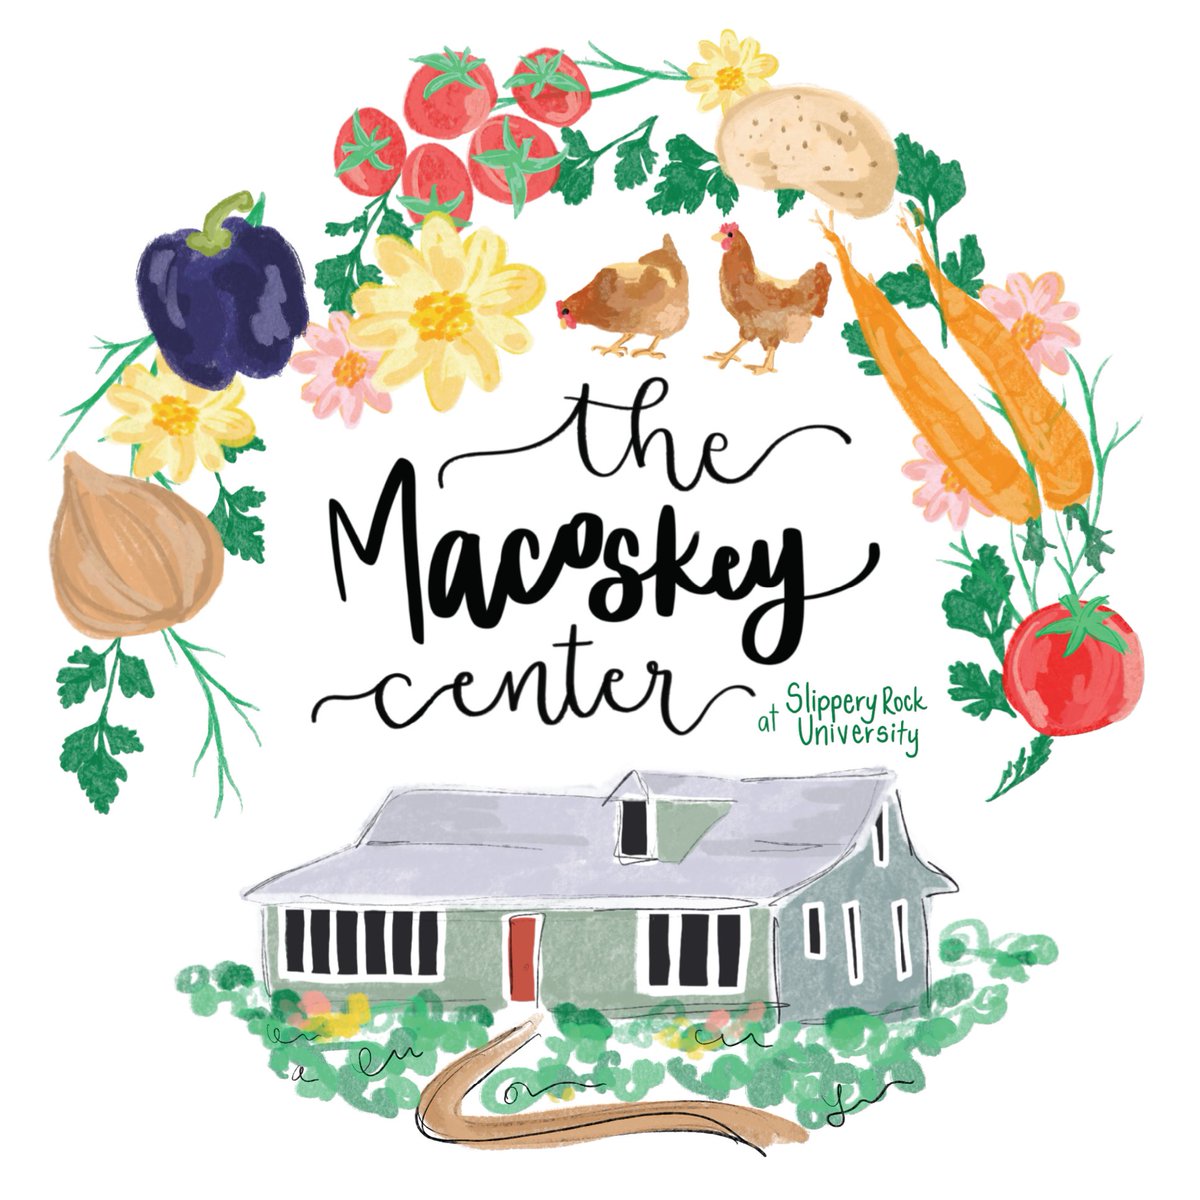 The Macoskey Center's Annual Earth Fest is this Saturday, April 20th from 12-5 pm and is a free event filled with food, live music, horse back riding, a local vendor market, a raffle basket fundraiser, environmental education activities for all ages, and more!